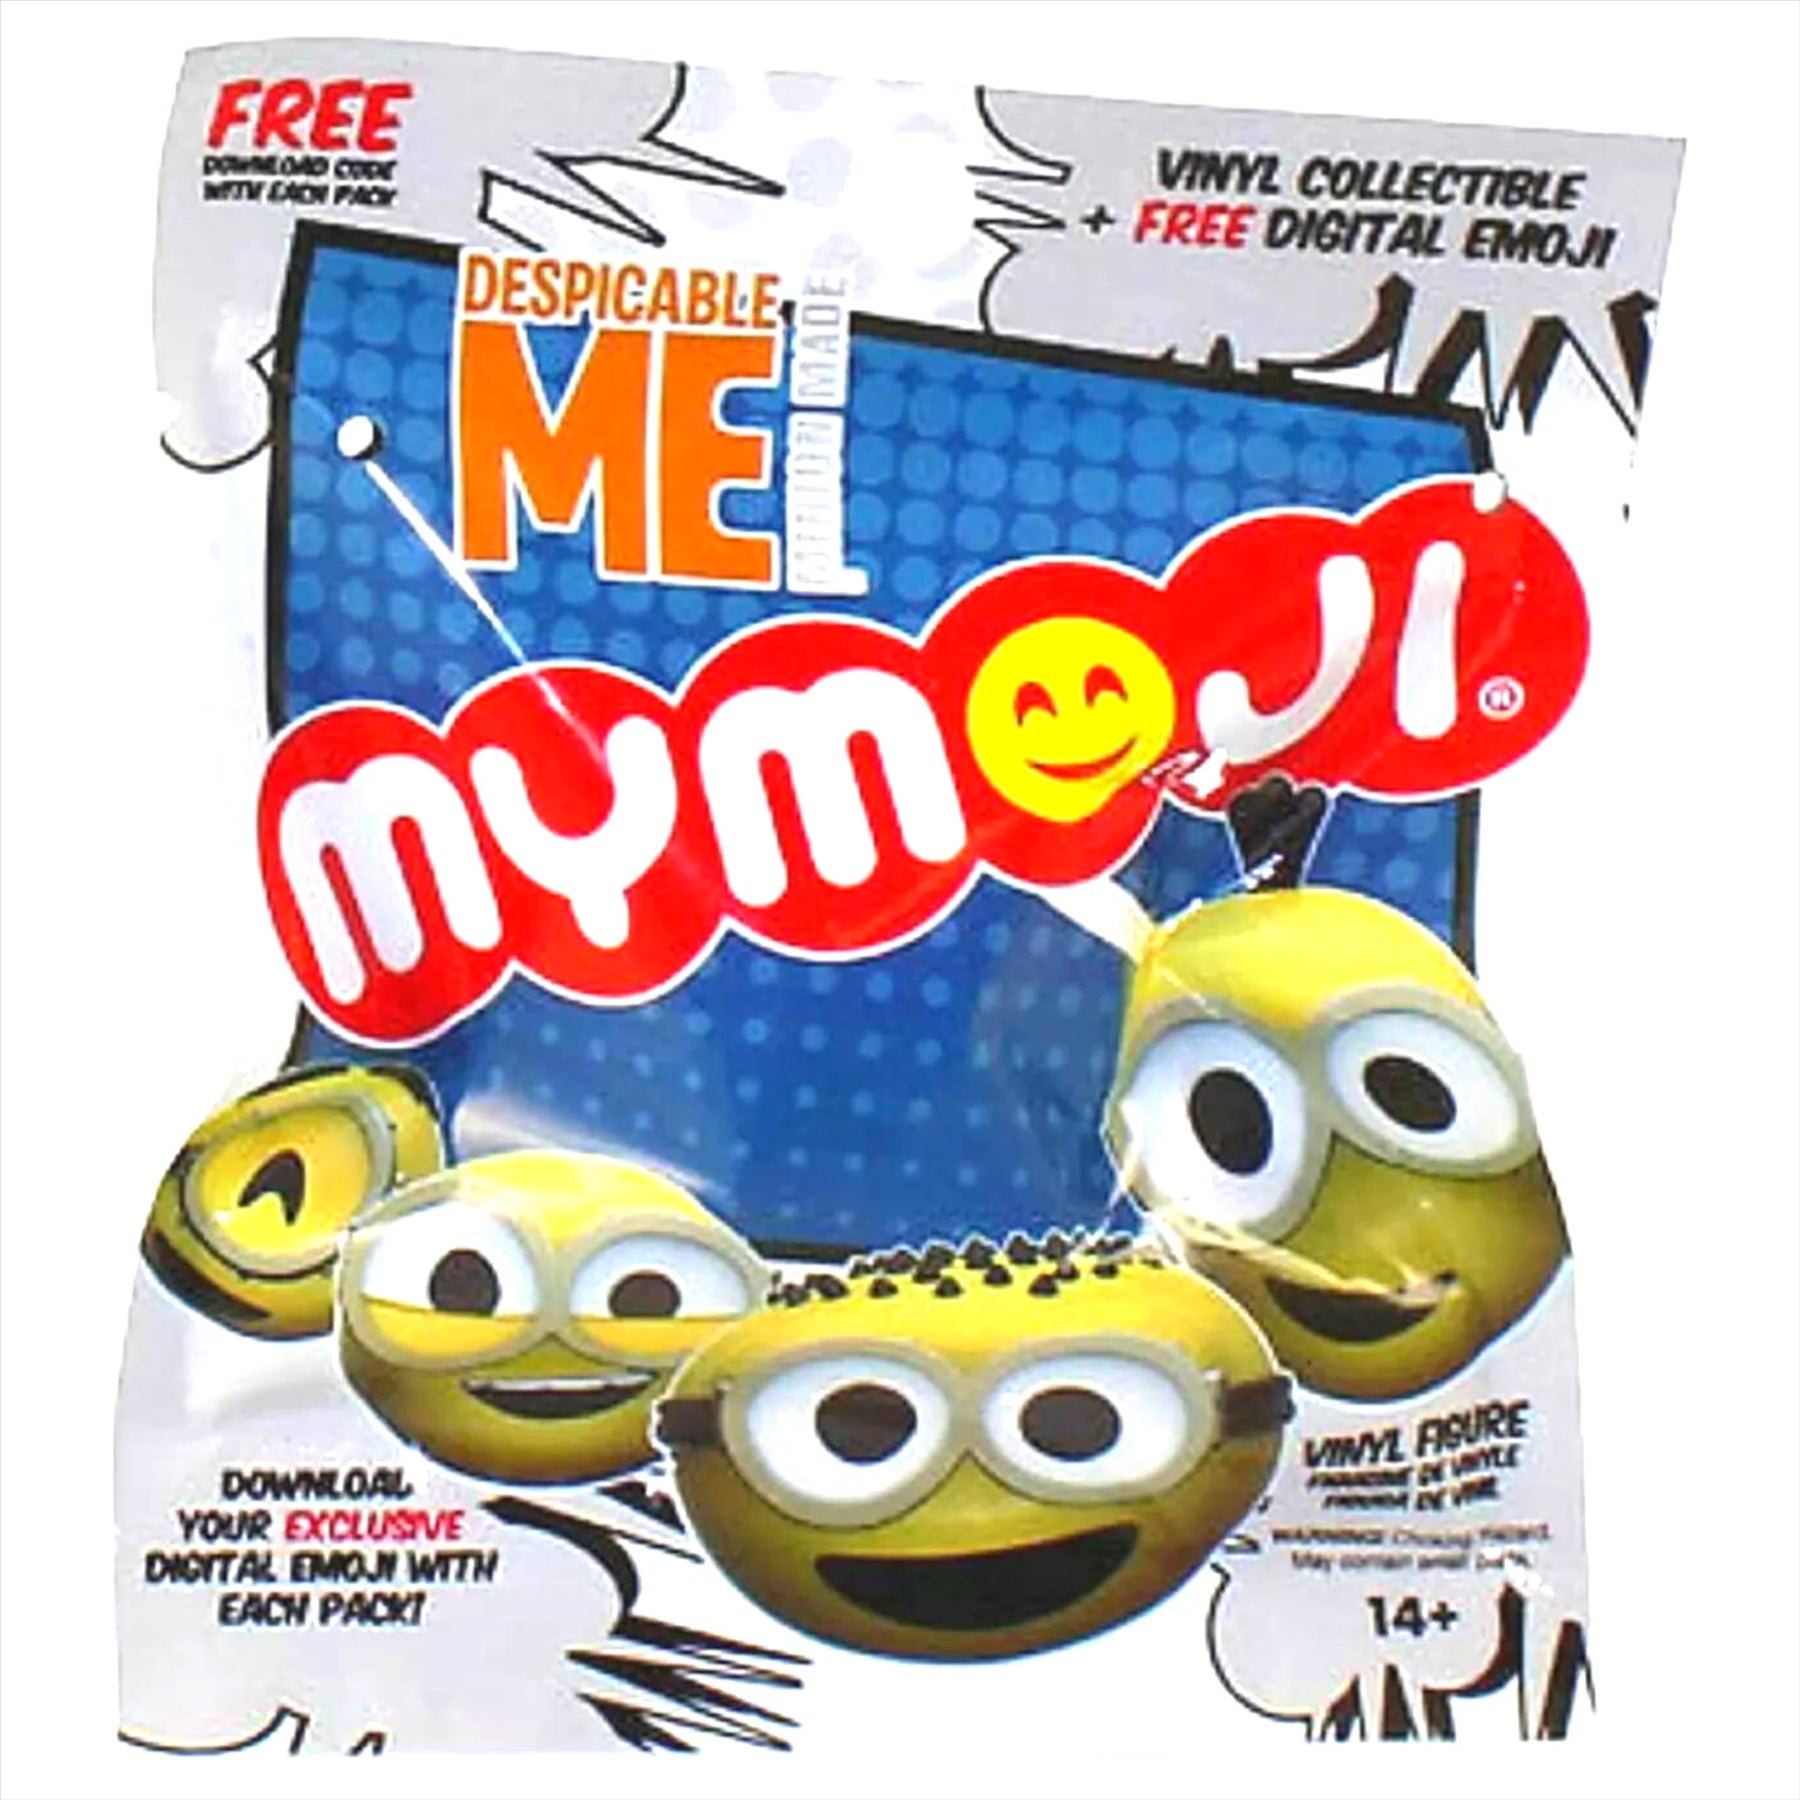 Exploding Minions Card Game & MyMoji Minions Collectible Figure Head Gift Sets with 2x Card Game & 10x MyMoji Figures - Toptoys2u